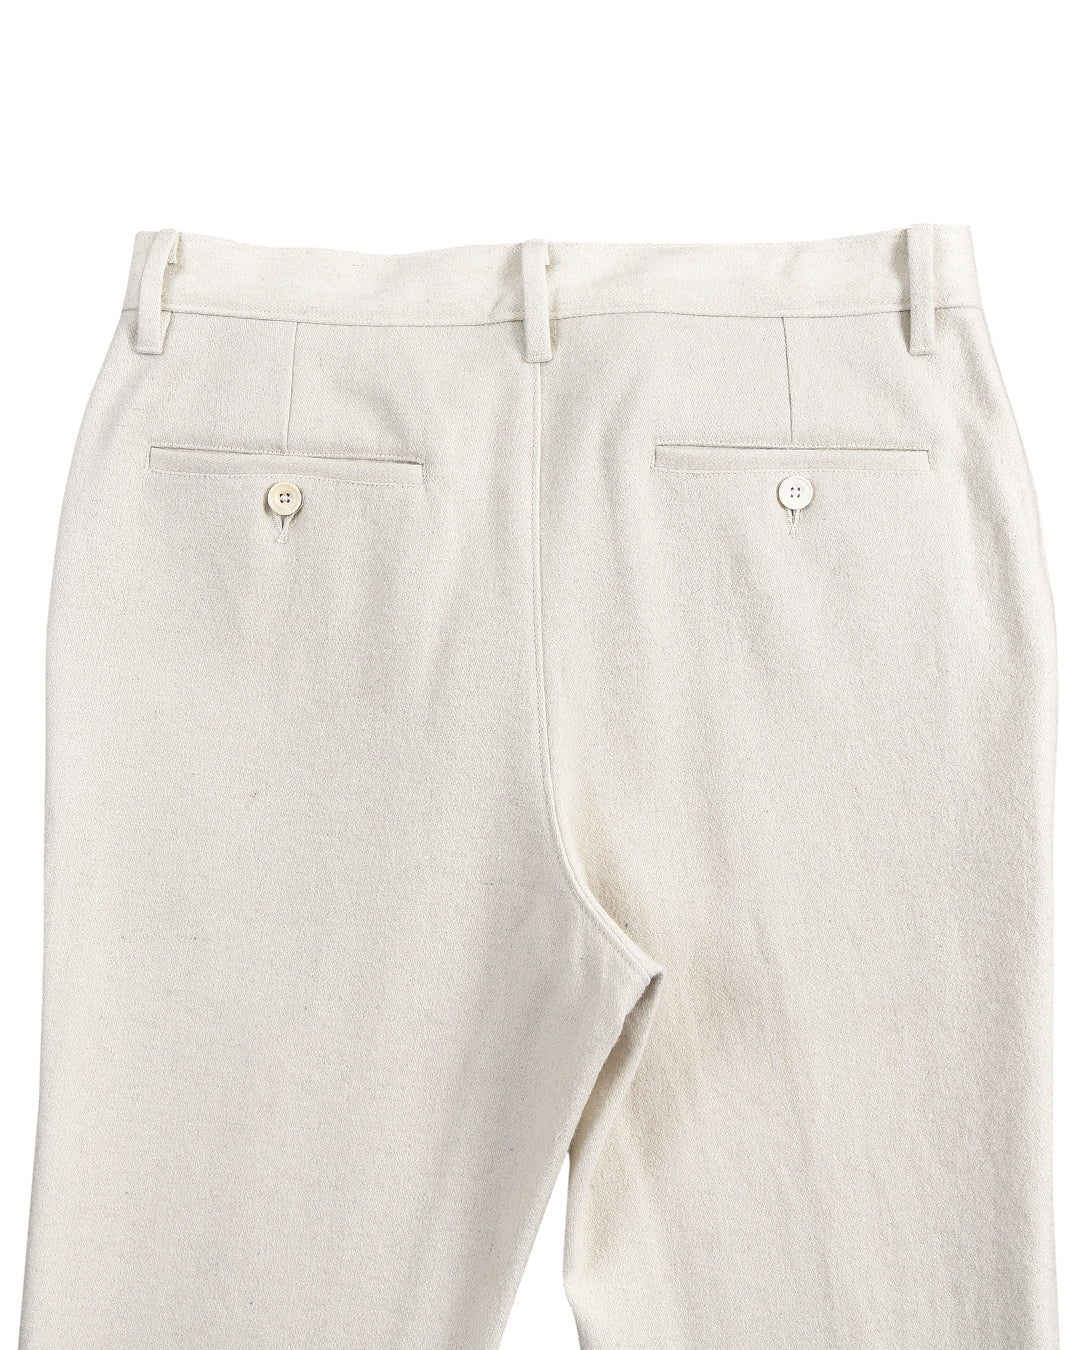 Cream Winter Pant in Recycled Wool